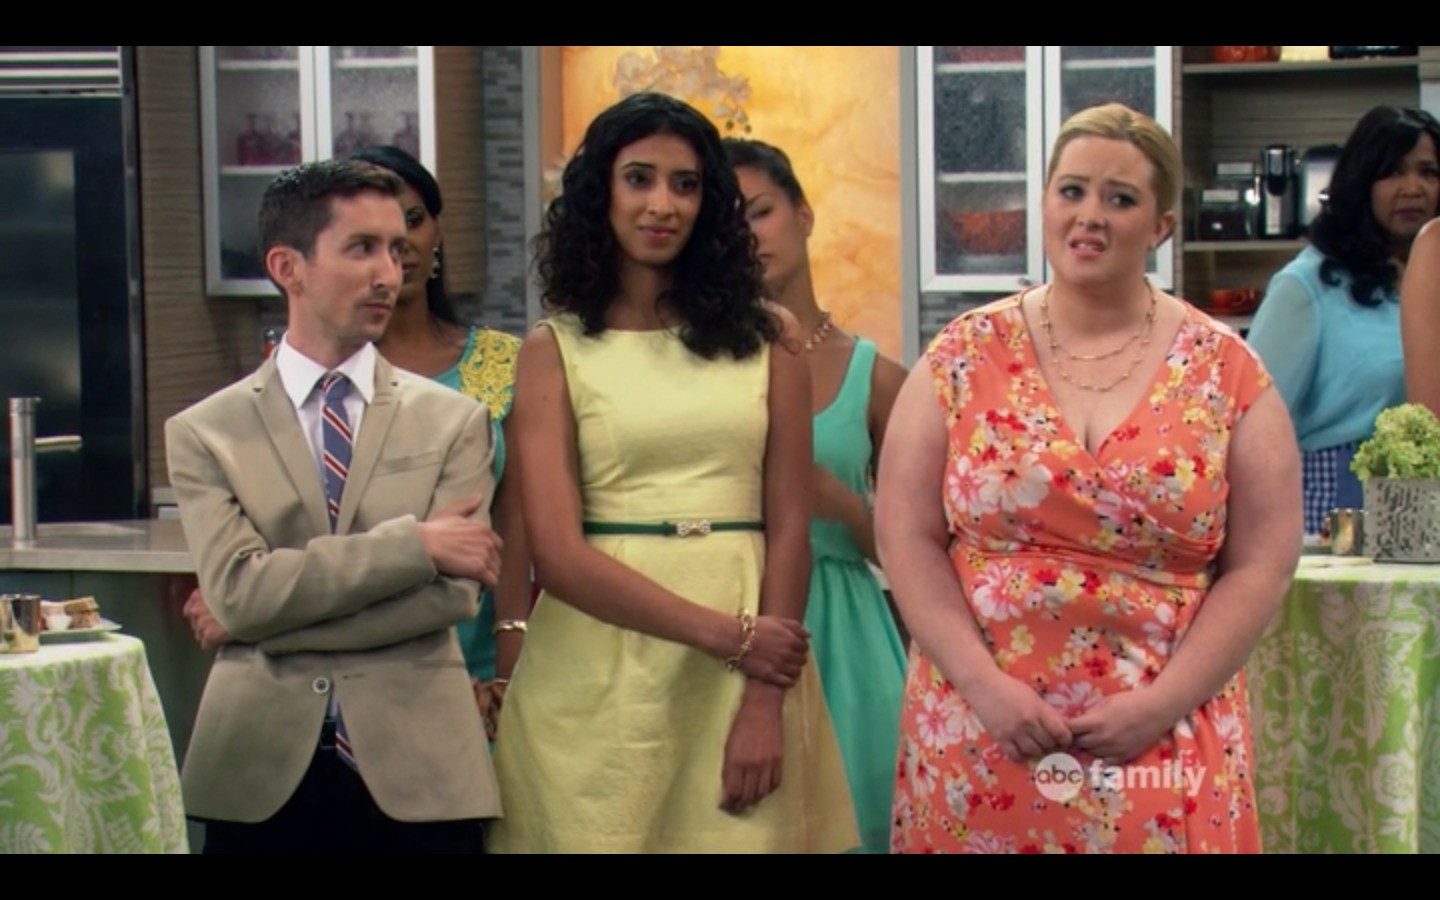 Ryan Alvarez, Hina Khan, and Michelle Meredith in Young & Hungry